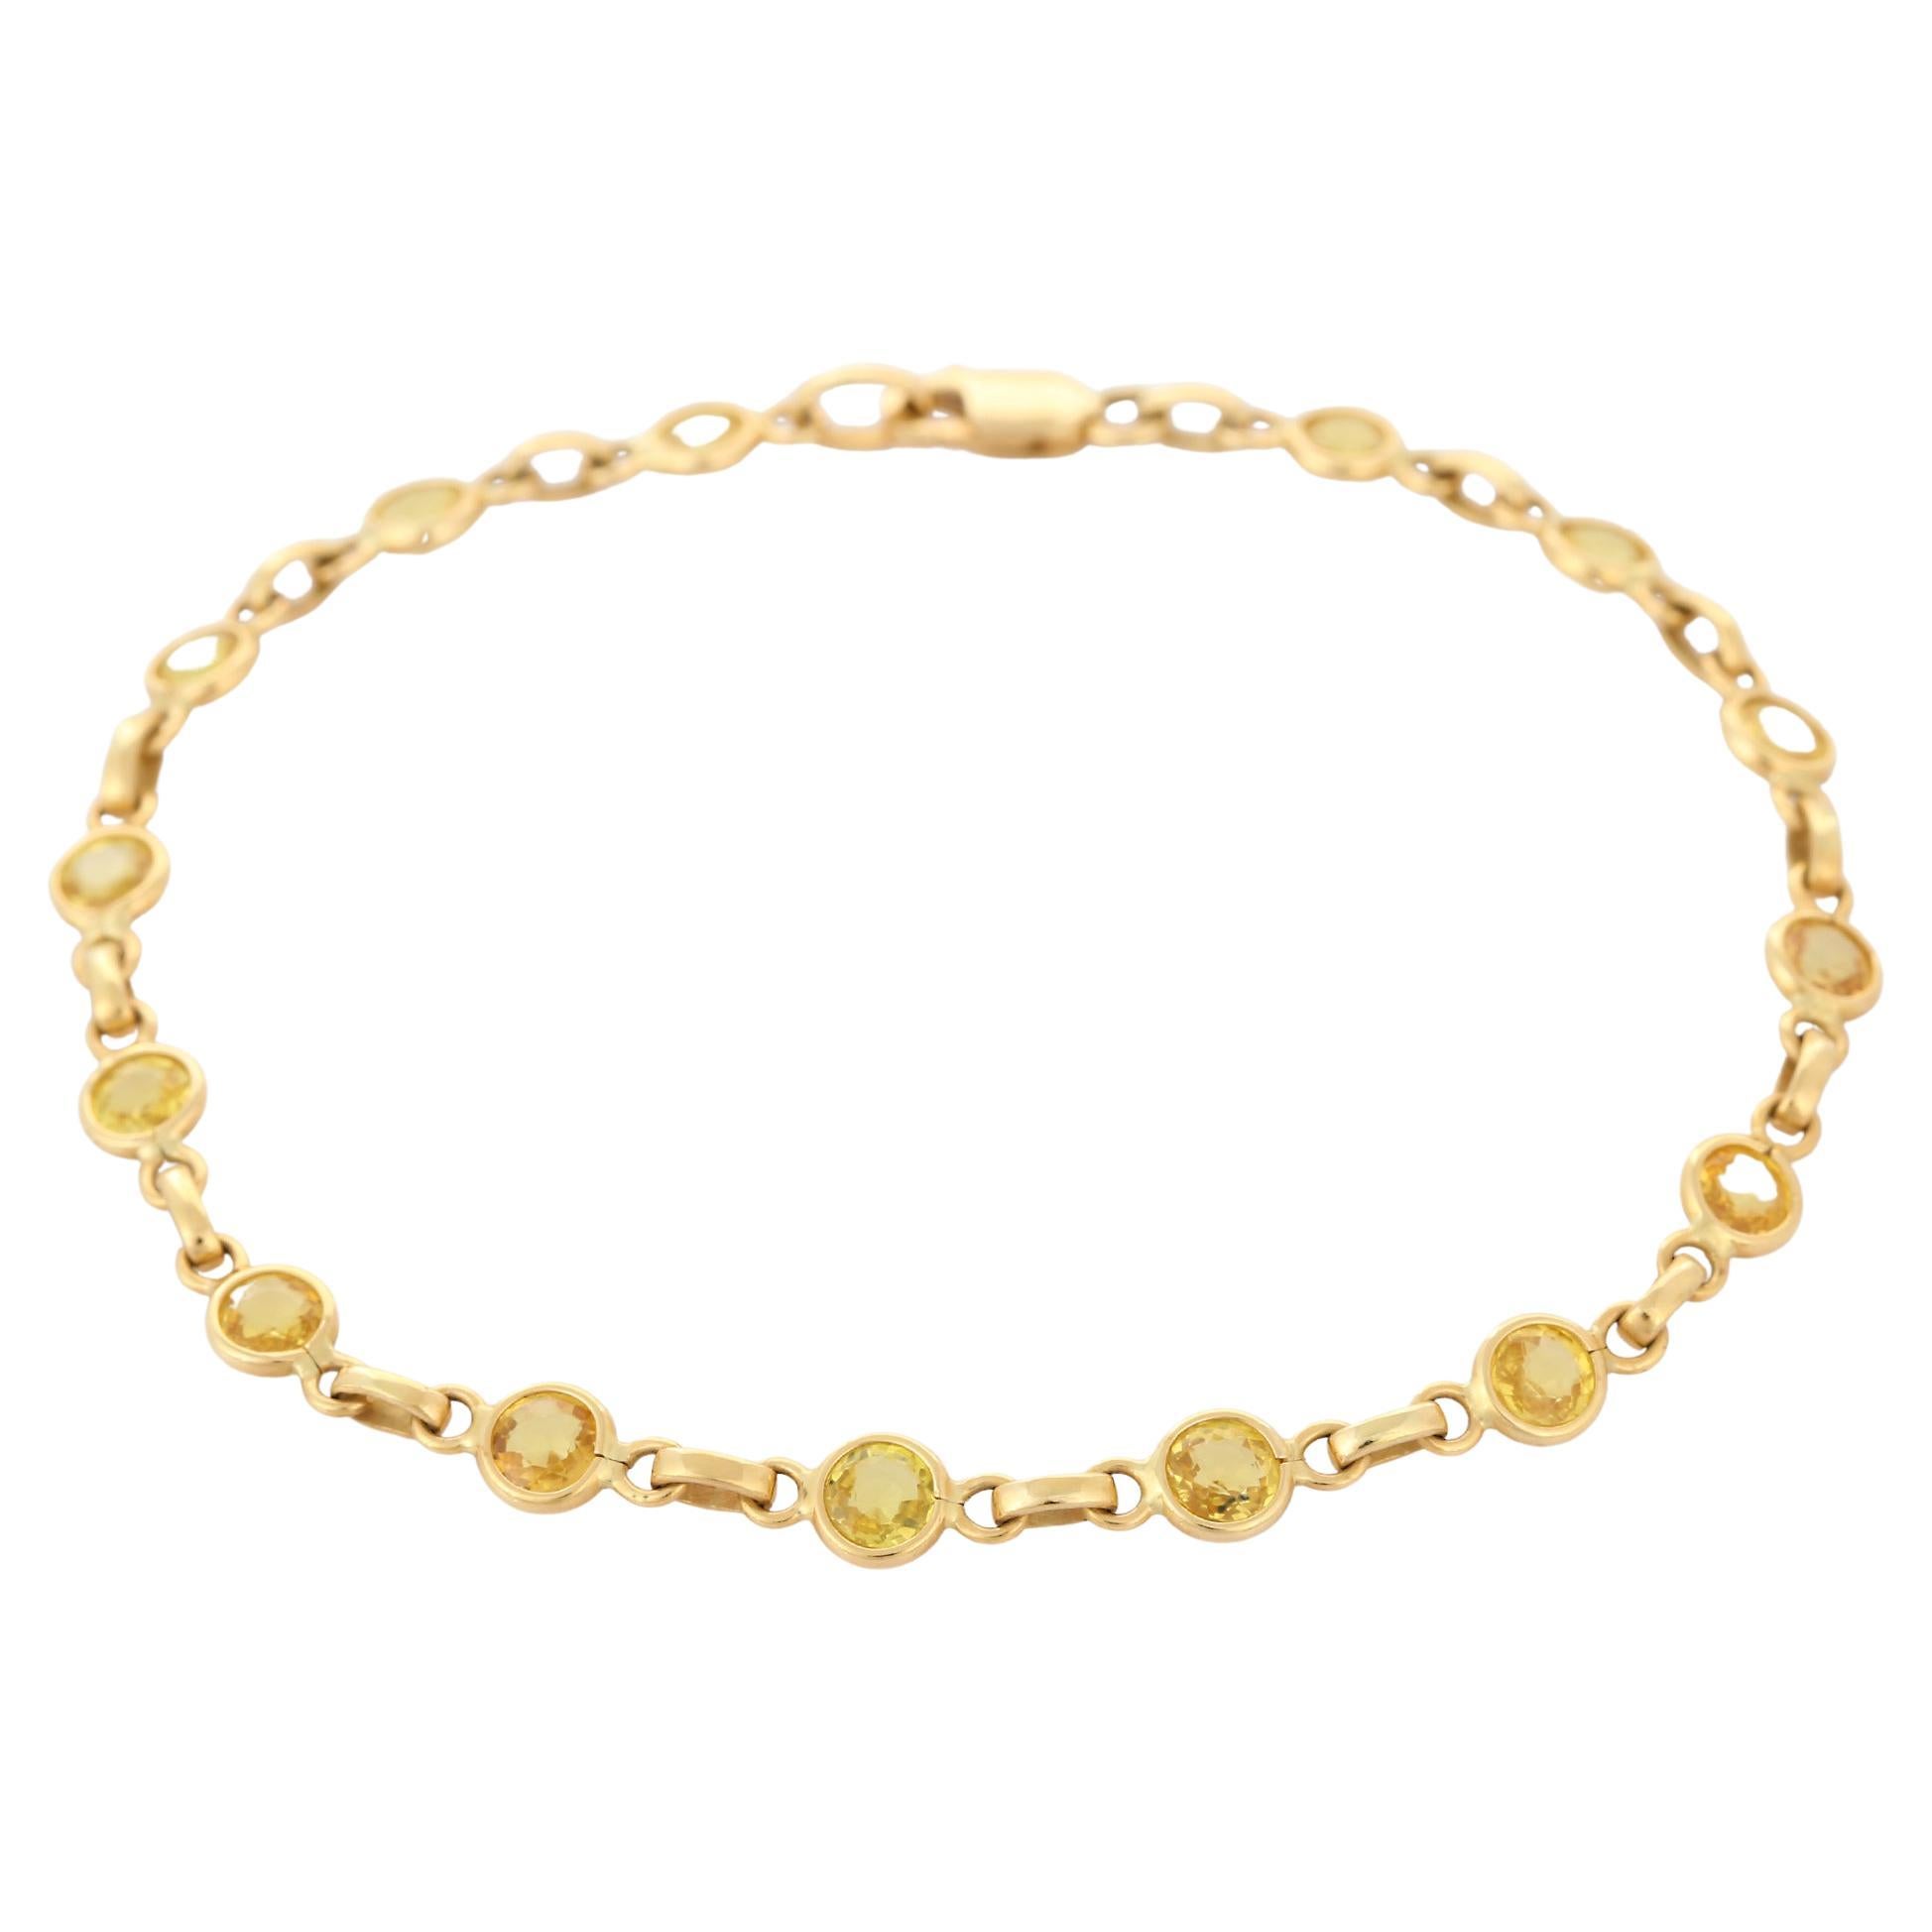 Alluring 4.14 Ct Round Cut Yellow Sapphire Chain Bracelet in 18K Yellow Gold